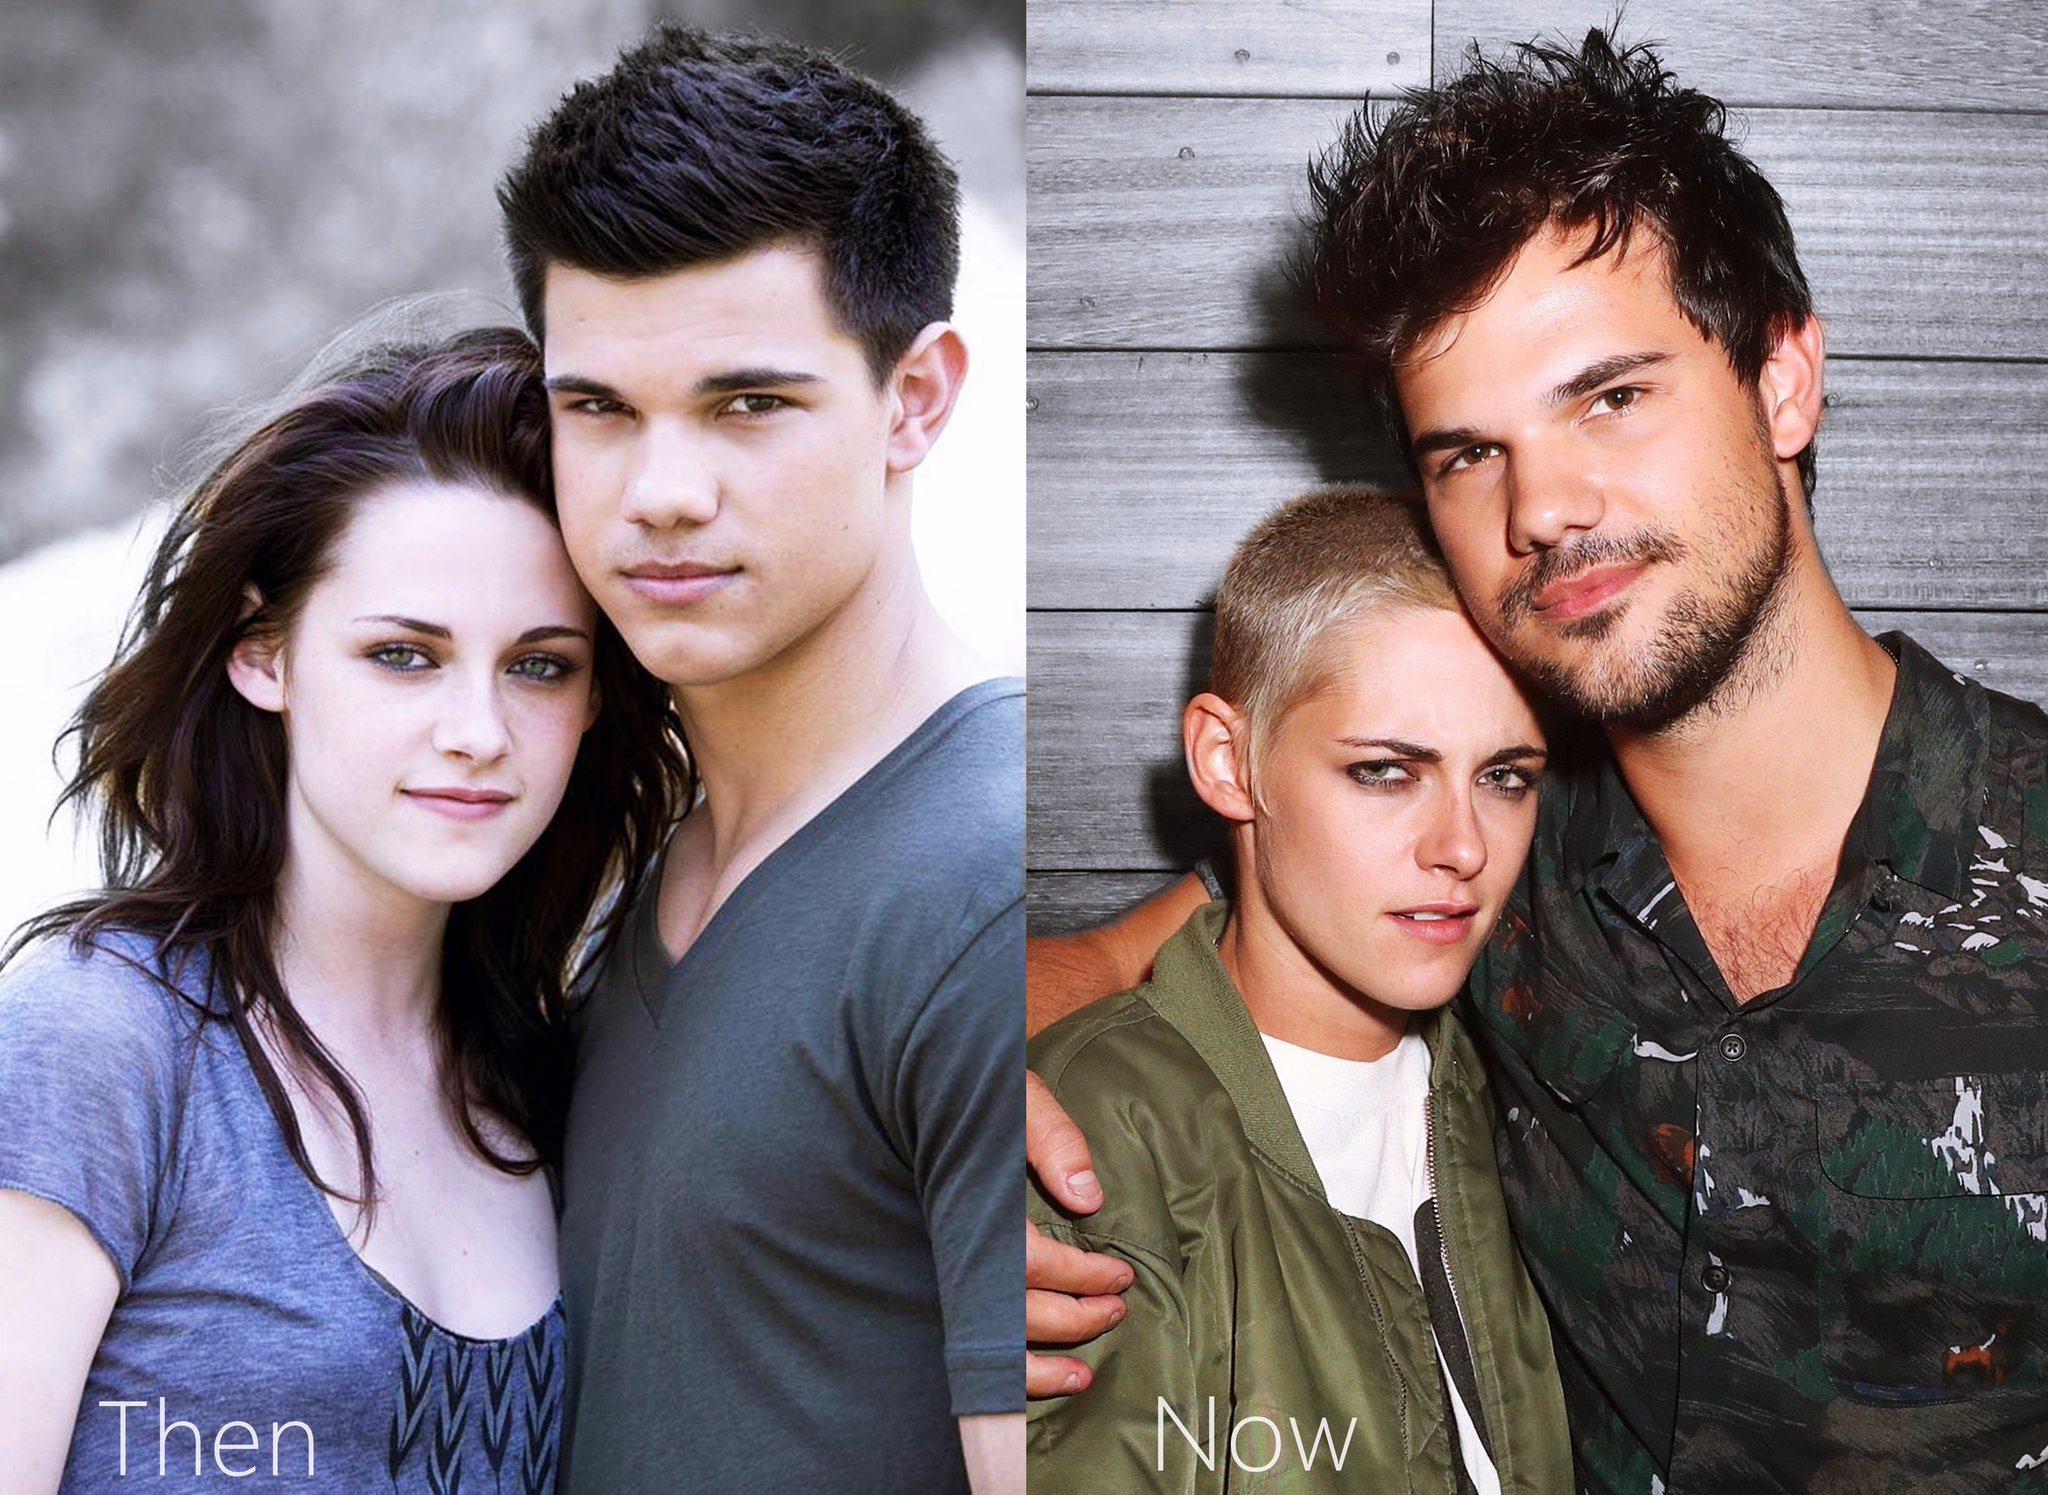 Now dating taylor lautner Who is